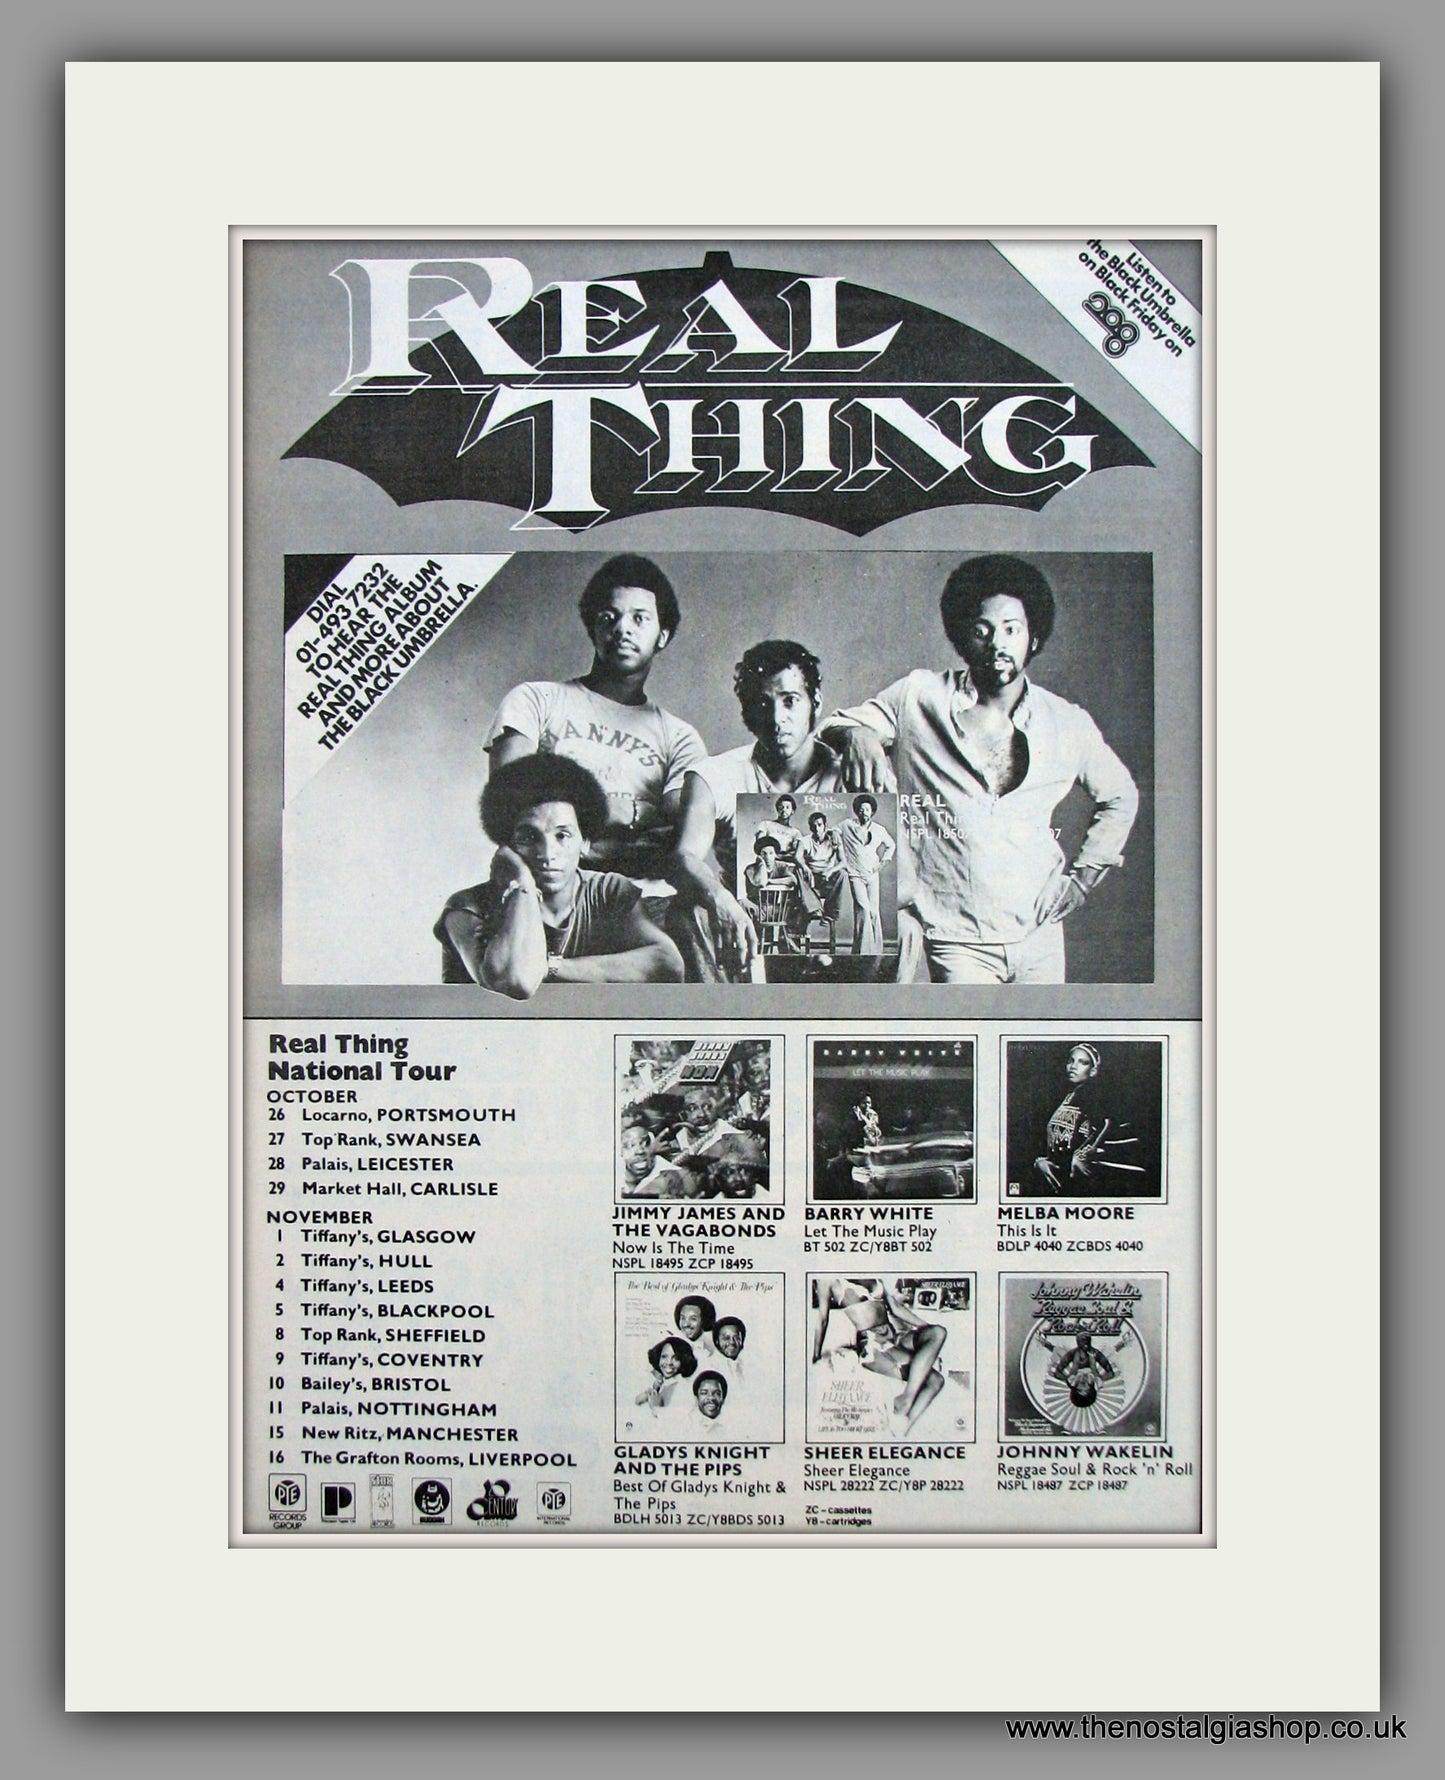 Real Thing And Tour Dates.  Original Vintage Advert 1976 (ref AD10543)